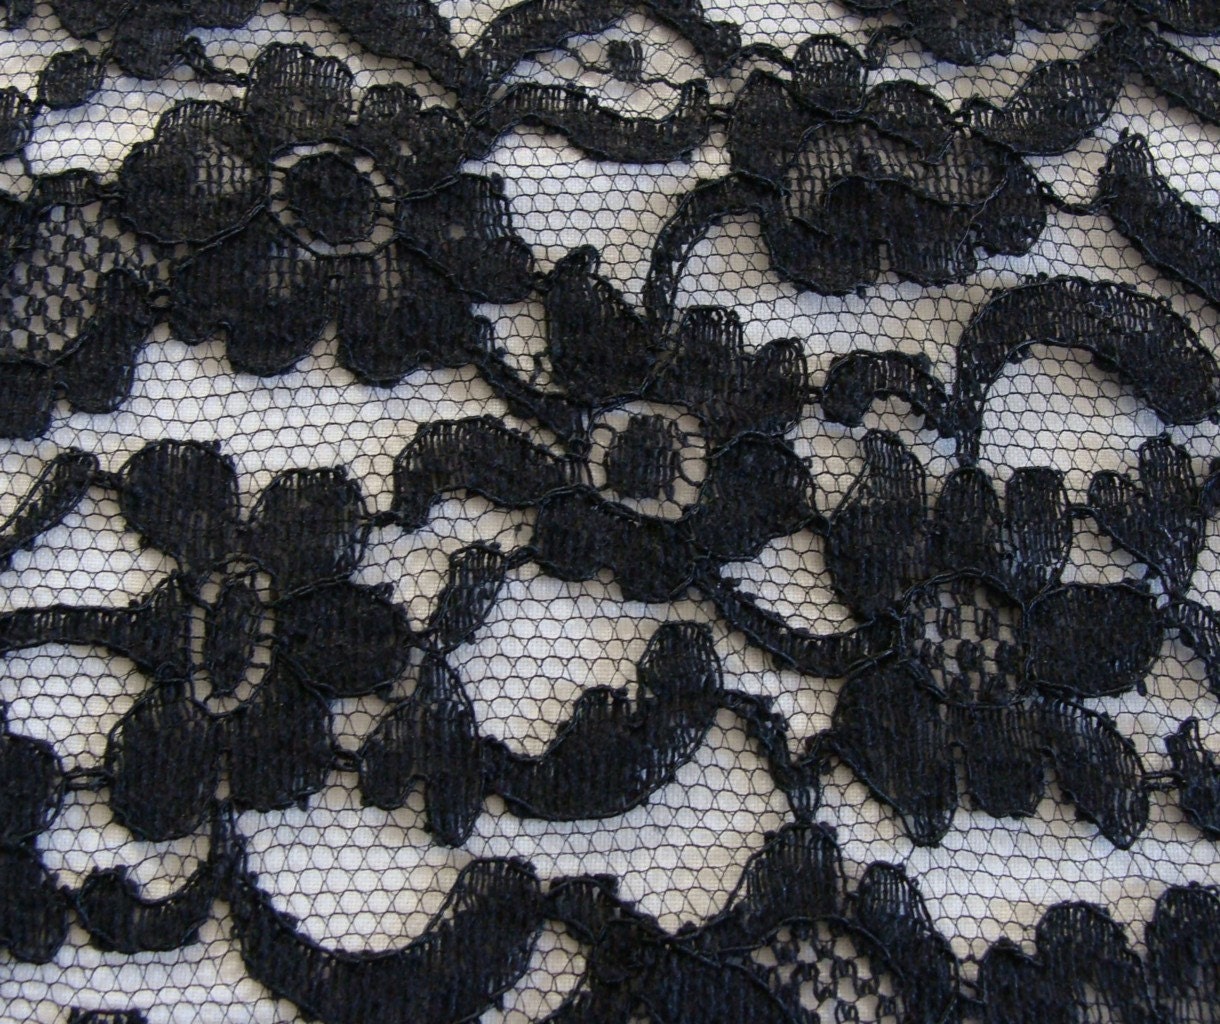 SALE Vintage Black Embroidered Net Lace Fabric by SewingVineyard